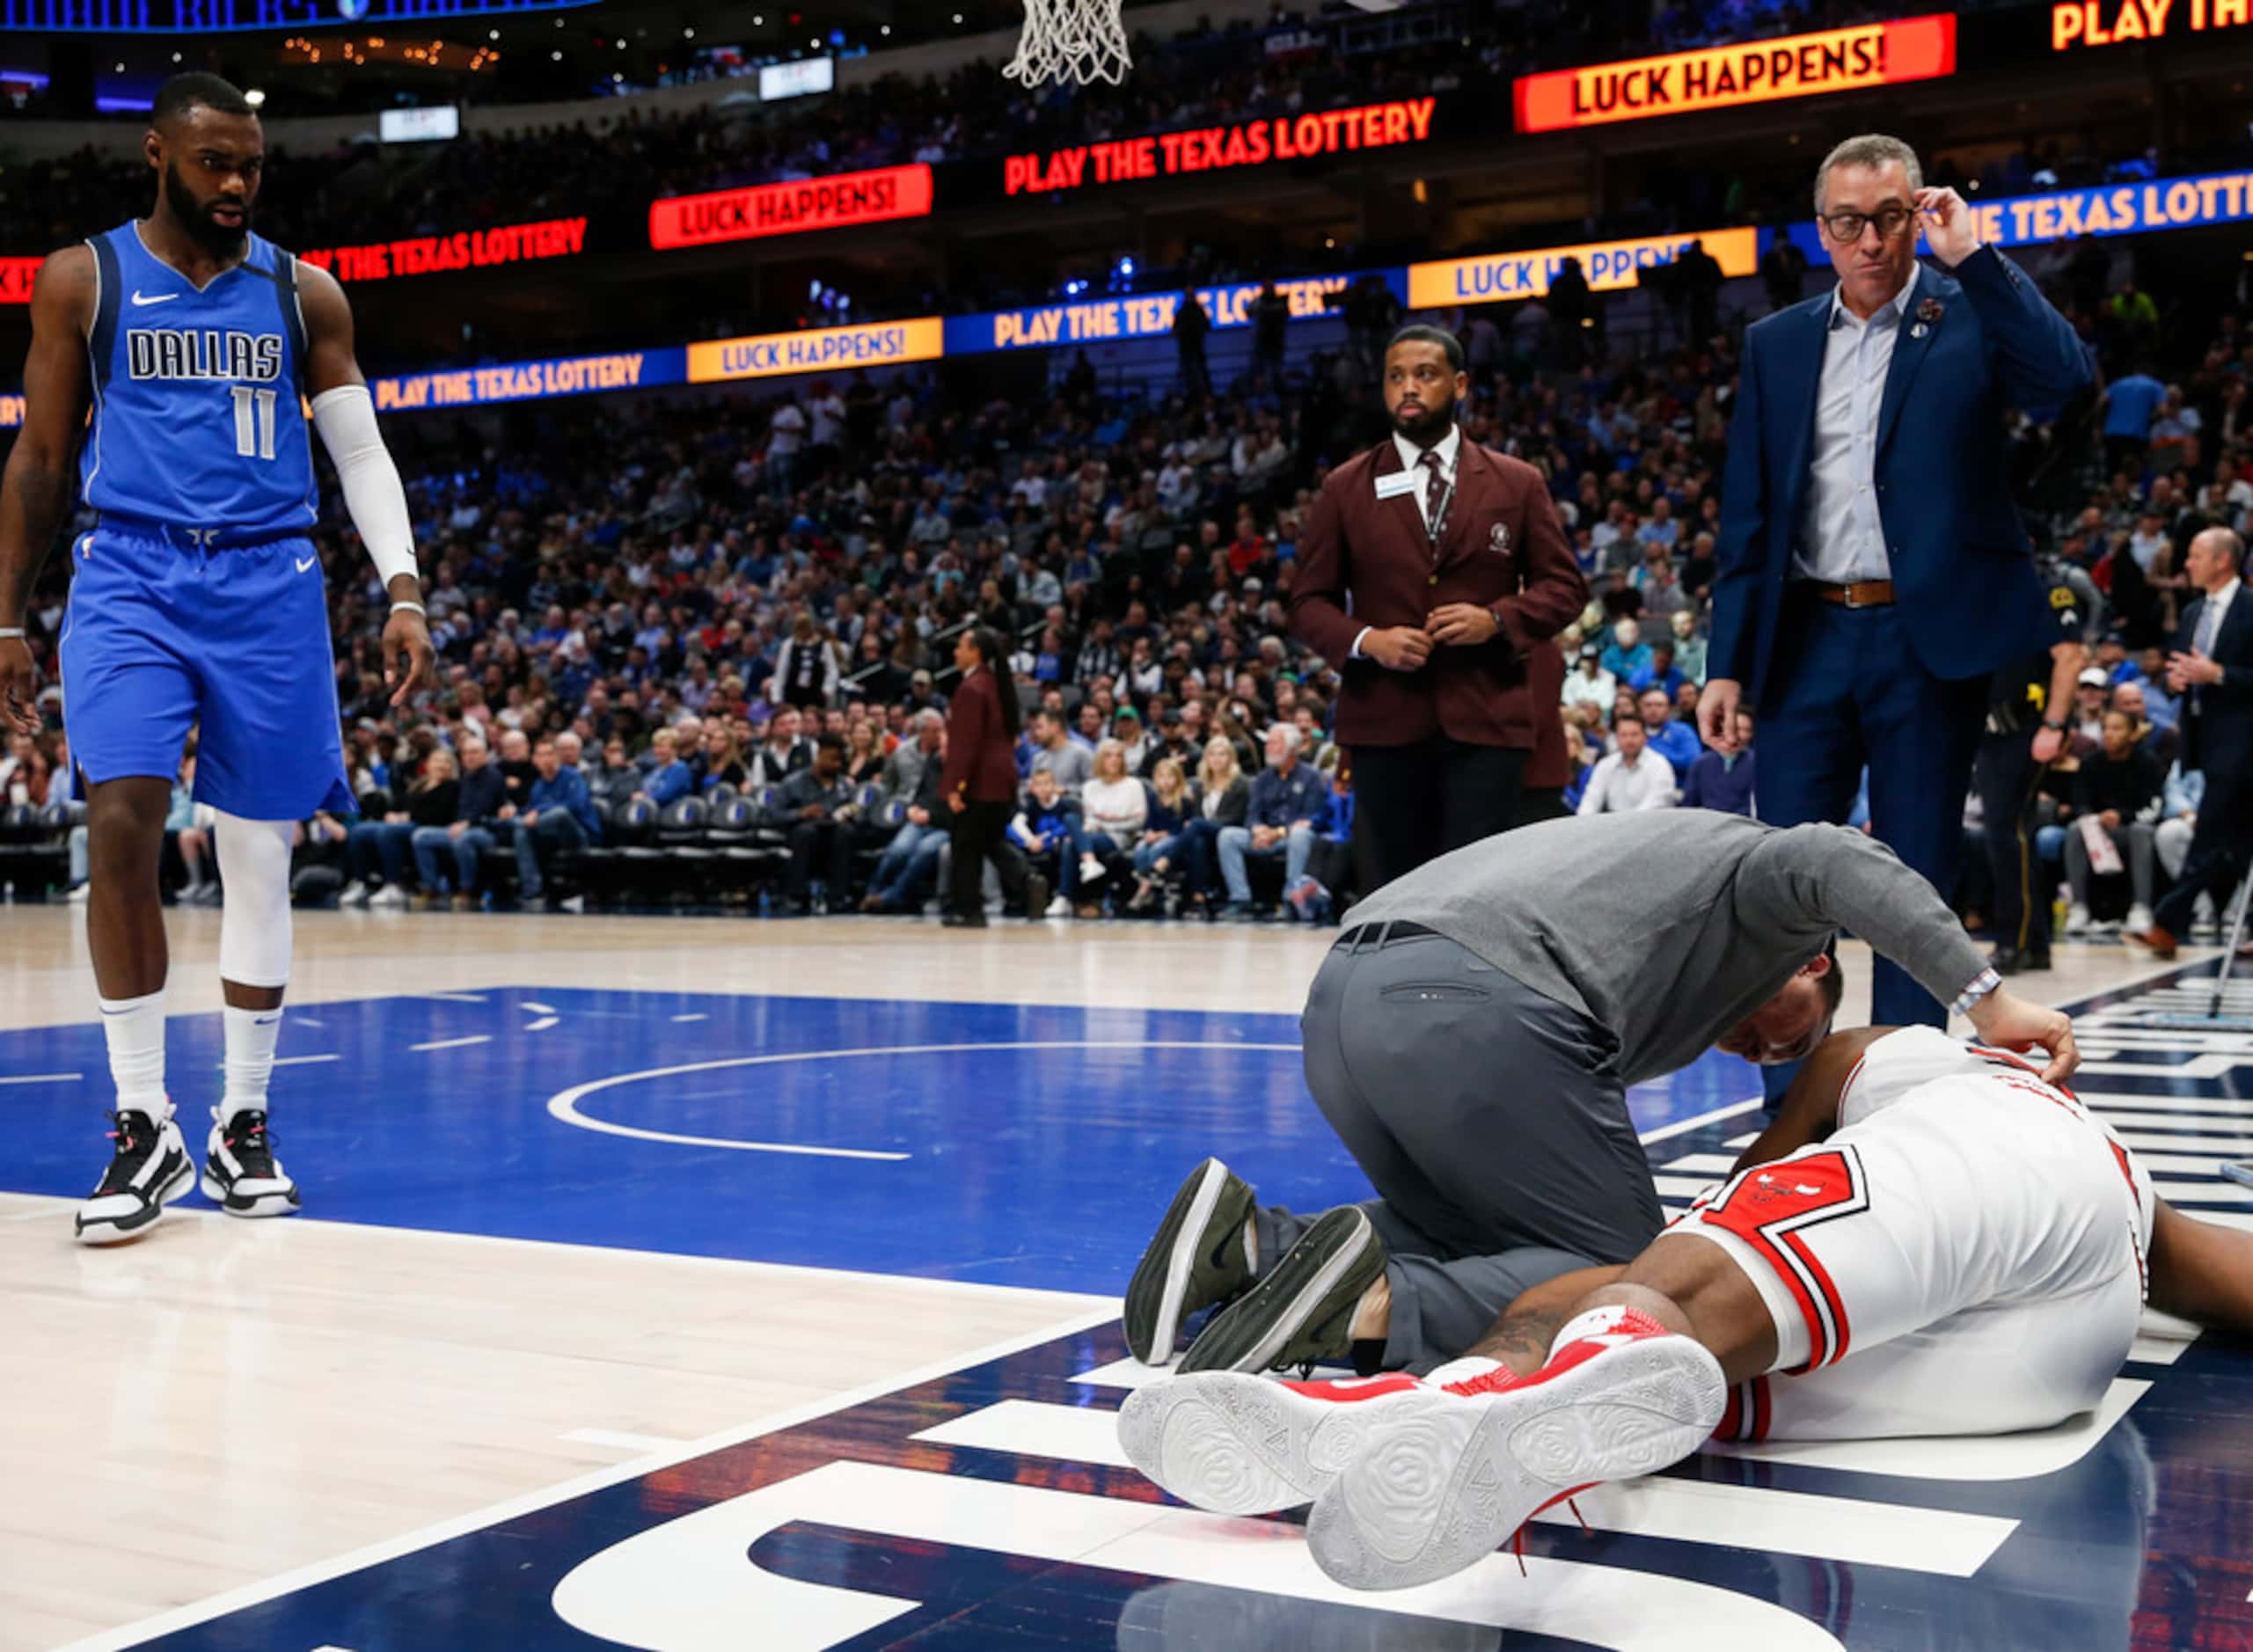 Trainers attend to Chicago Bulls center Wendell Carter Jr. (34) after being injured during...